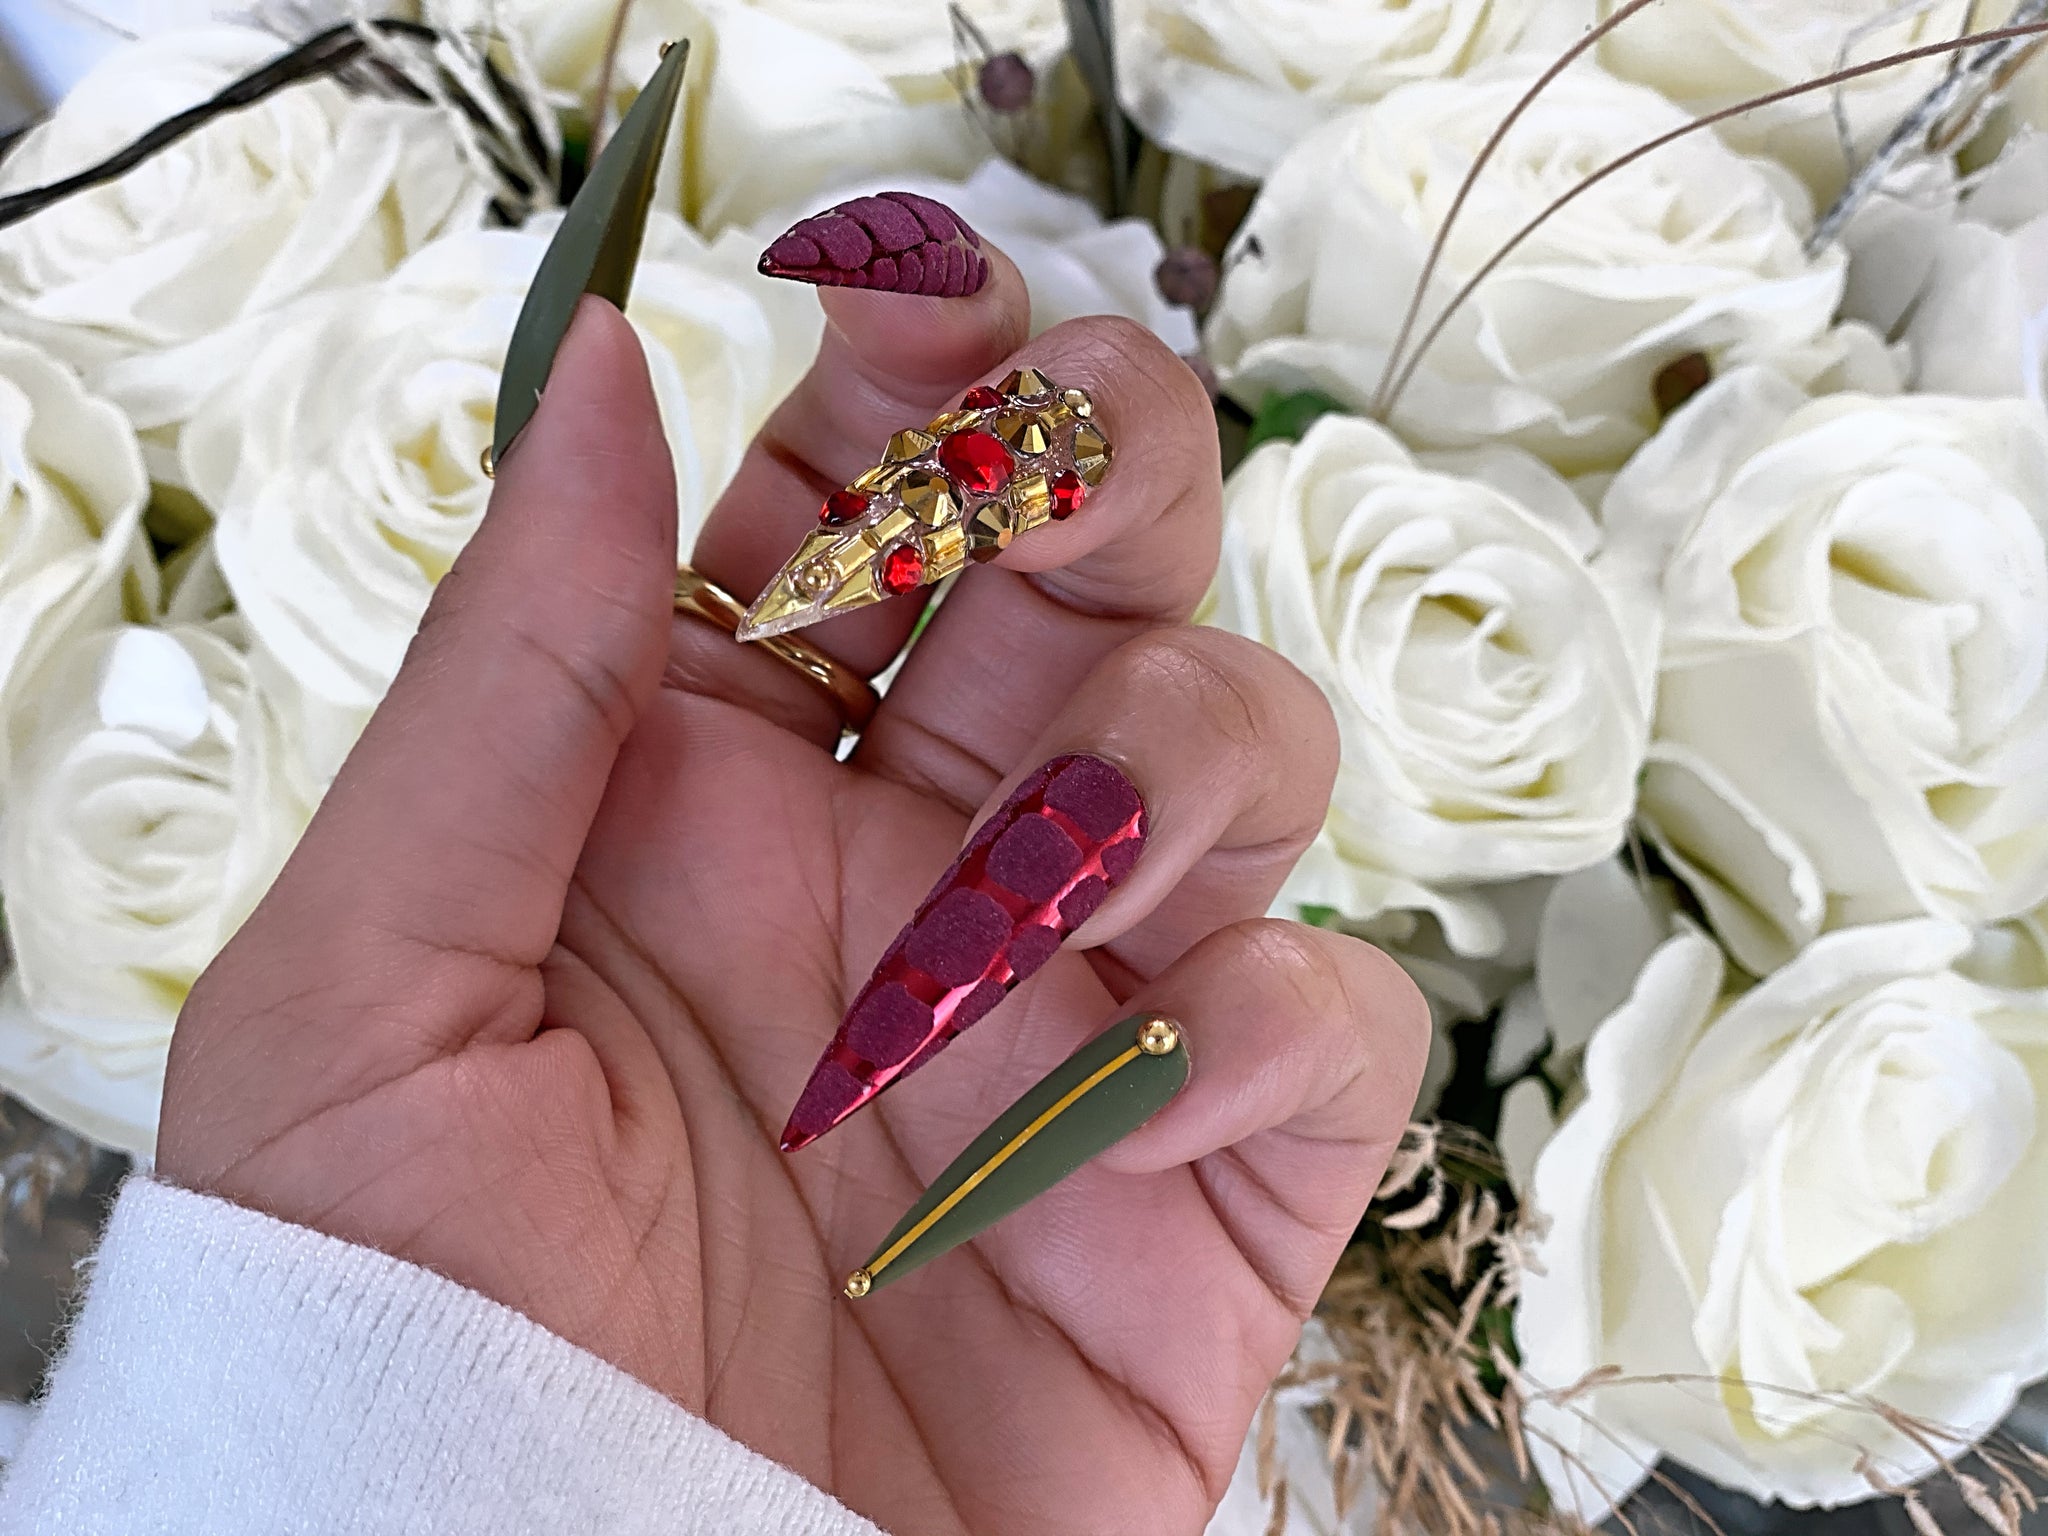 Follow @seastunna For More! | Curved nails, Duck nails, Acrylic nails coffin  pink